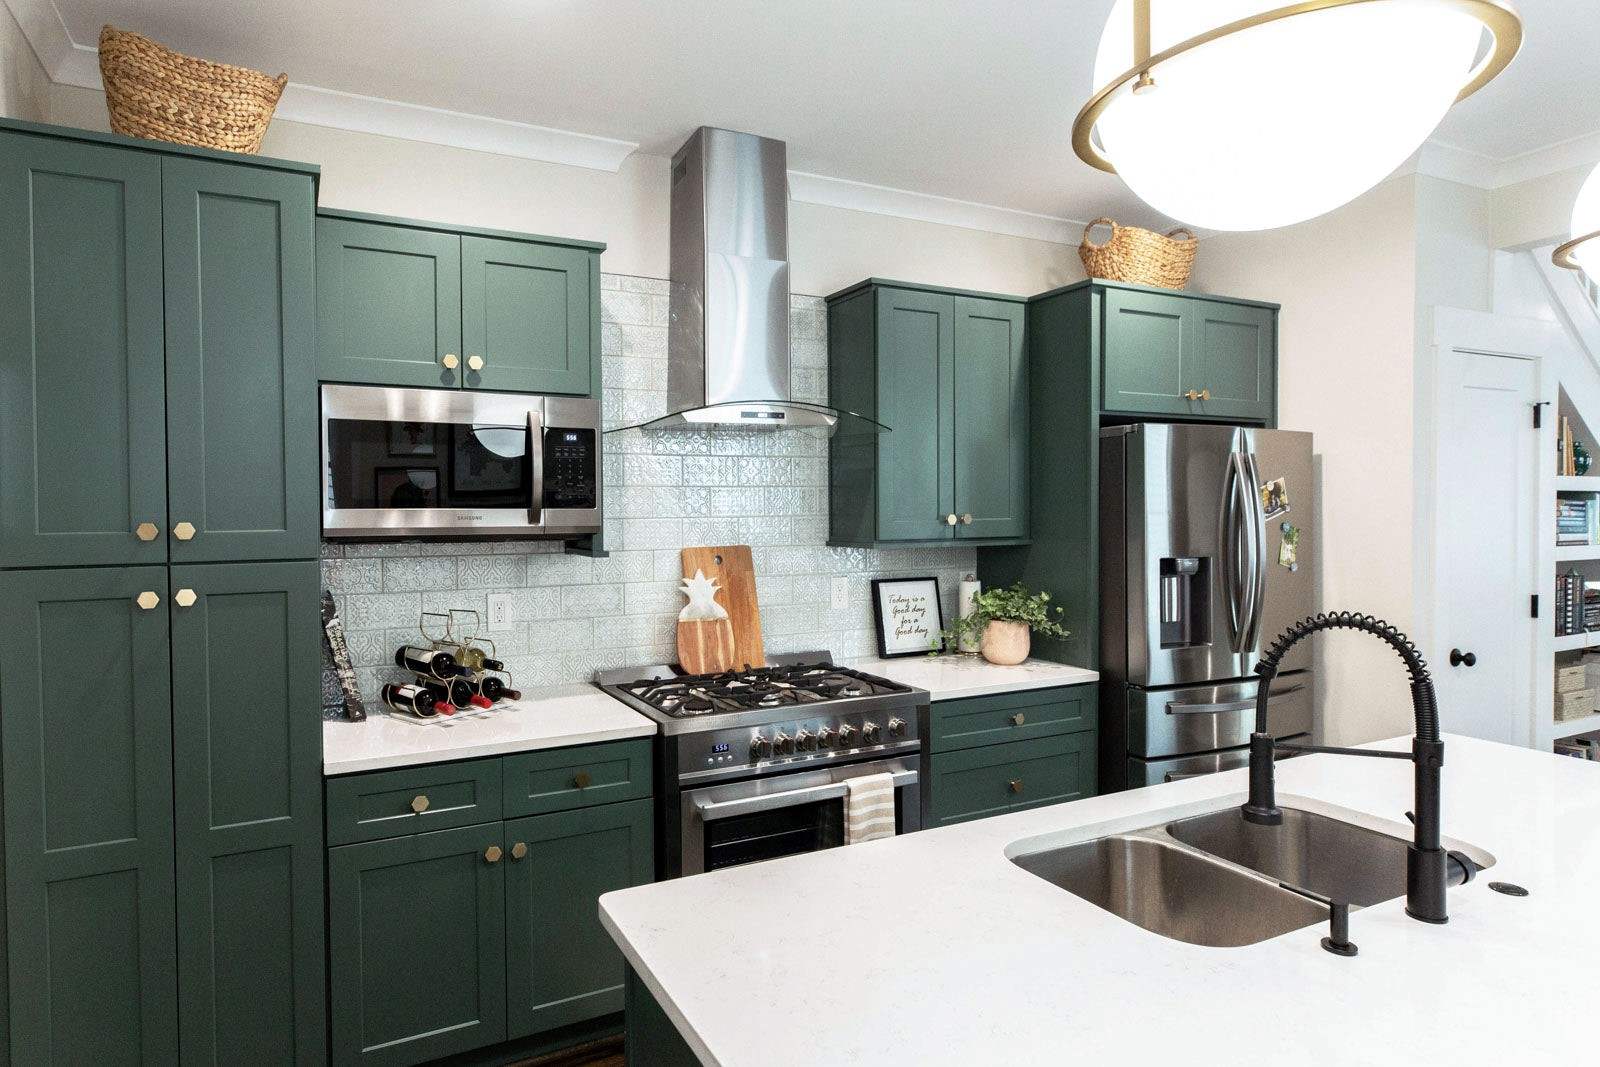 green kitchen cabinets with appliances, chimney, sink, white countertops, and fridge